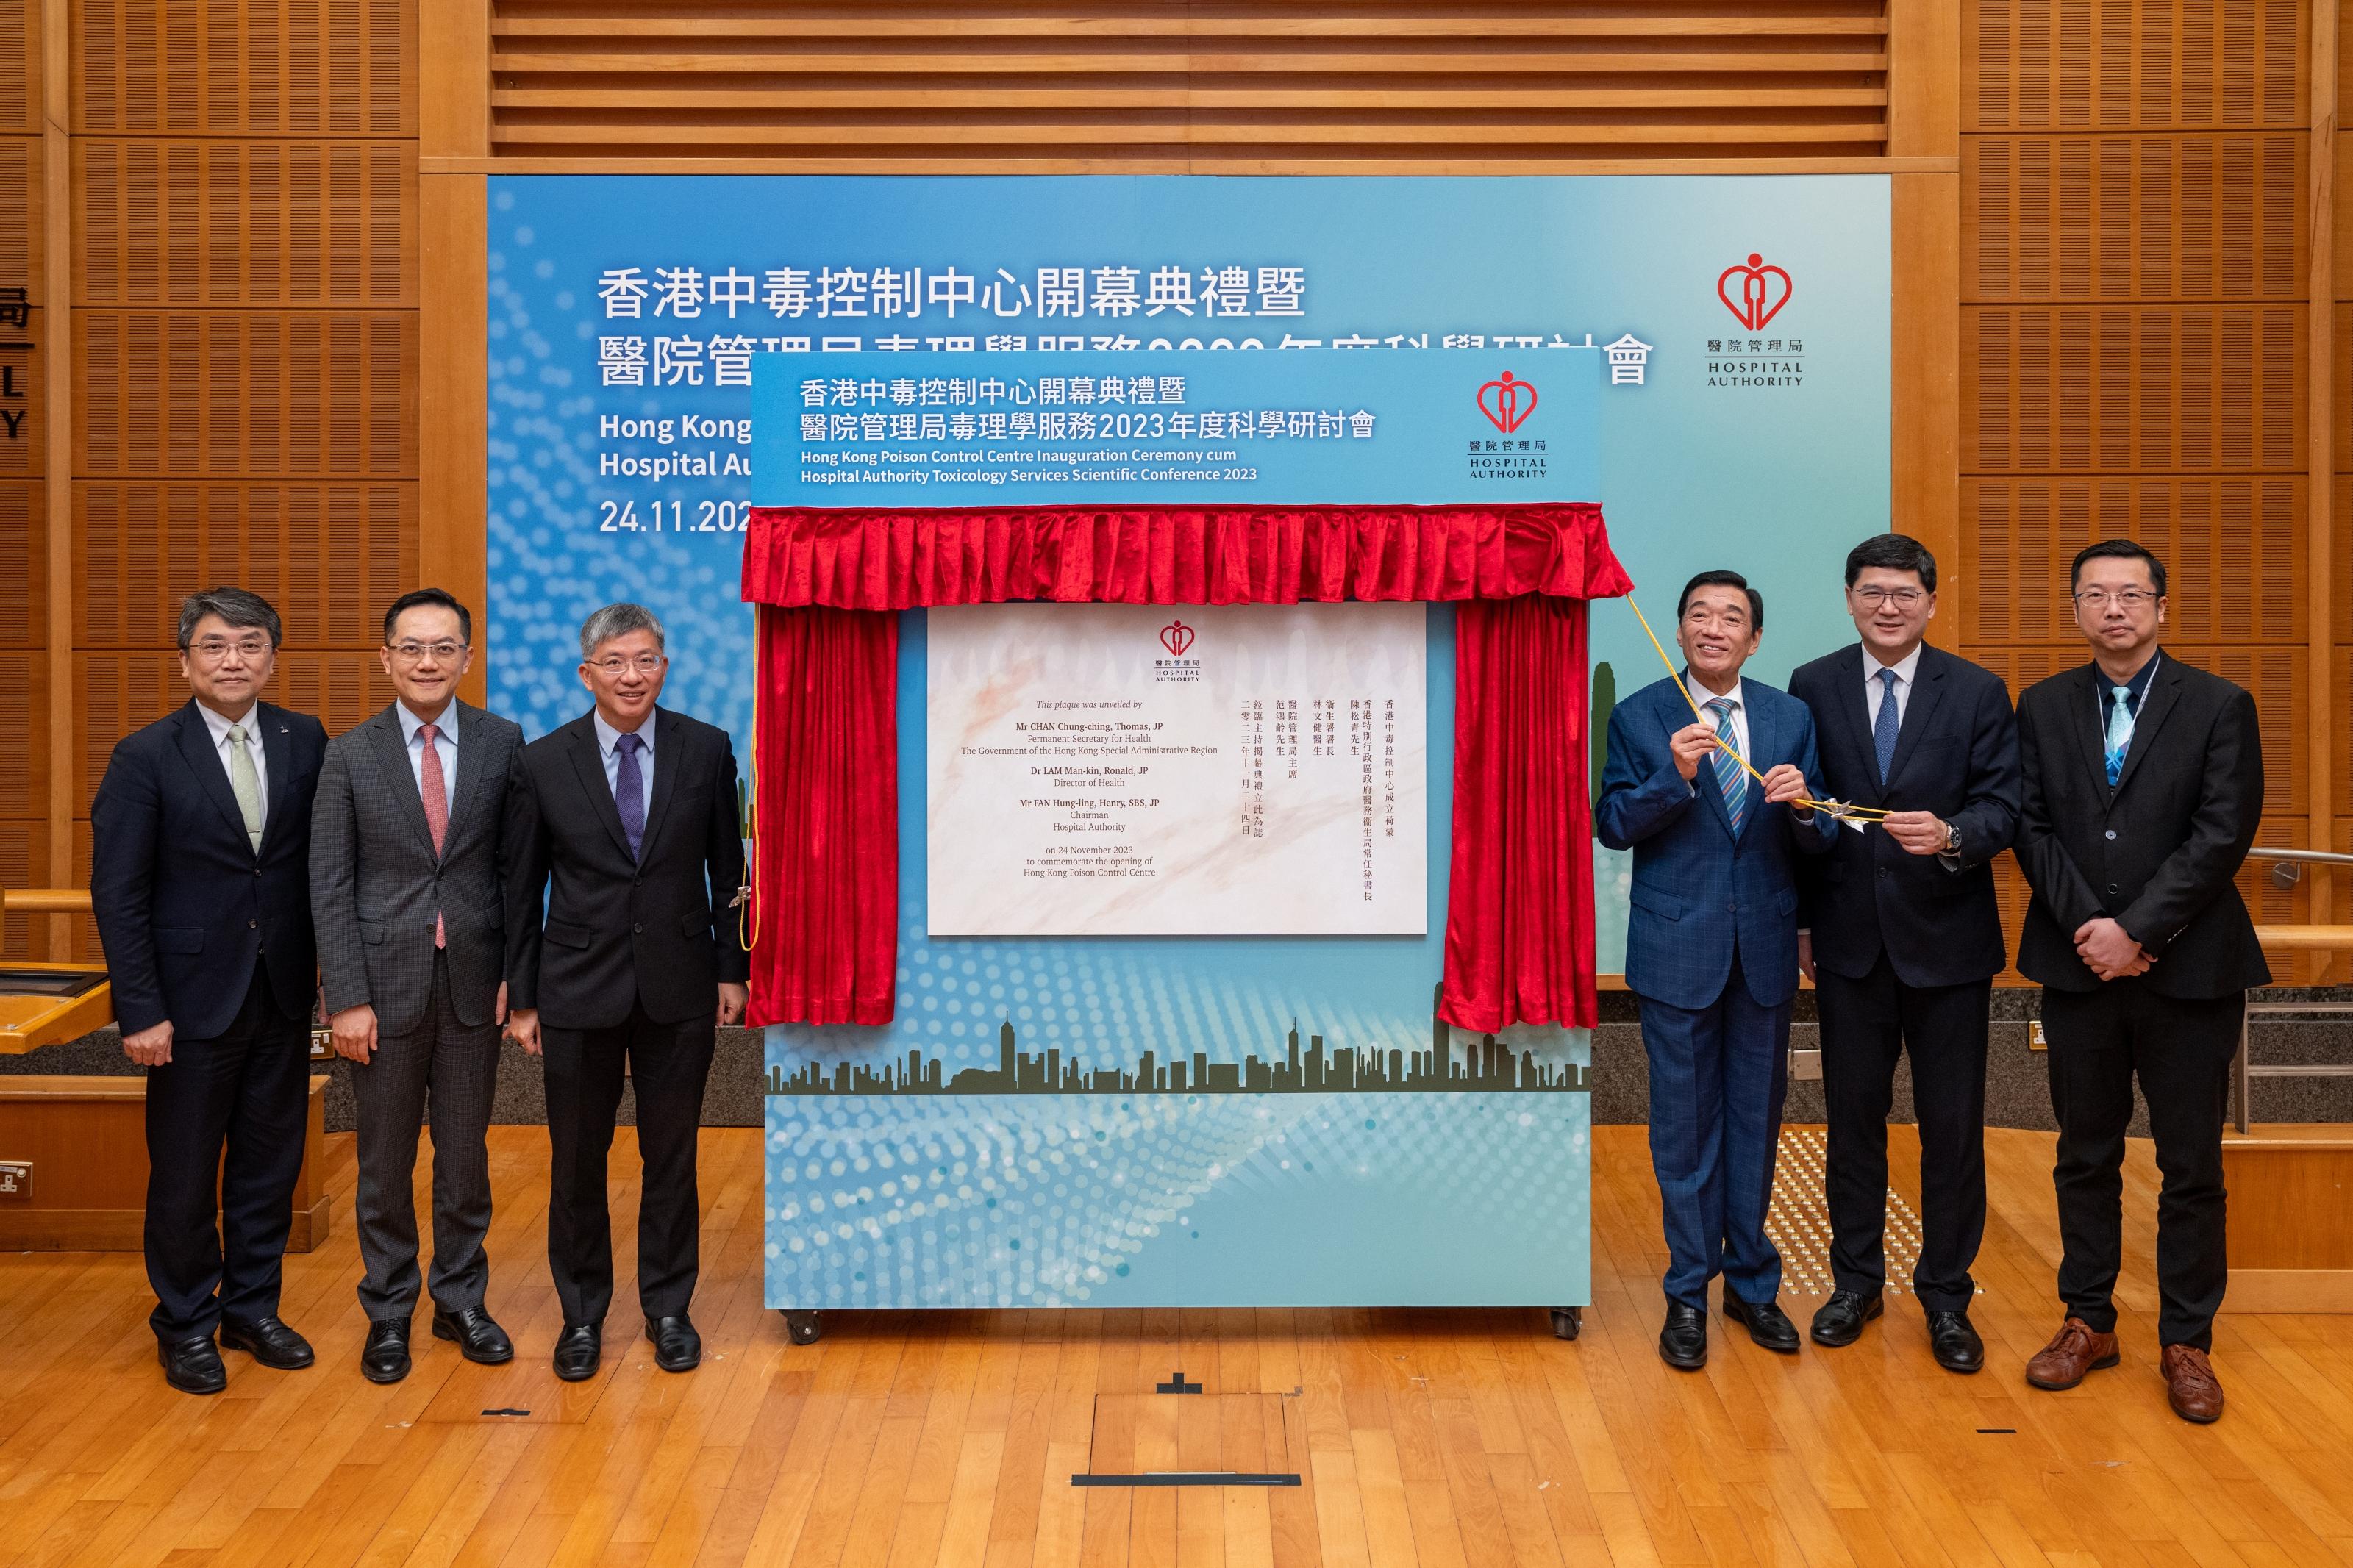 The Hospital Authority (HA) Hong Kong Poison Control Centre (HKPCC), which will co-ordinate poison control works in the public healthcare sector of Hong Kong, opens today (November 24). Photo shows the Chairman of the HA, Mr Henry Fan (third right); the Permanent Secretary for Health, Mr Thomas Chan (third left); the Chief Executive of the HA, Dr Tony Ko (second right); the Director of Health, Dr Ronald Lam (second left); the Cluster Chief Executive of Kowloon East Cluster, Dr Deacons Yeung (first left); and the Director (Quality & Safety) of the HA, Dr Michael Wong (first right), unveiling the plaque for the HKPCC.